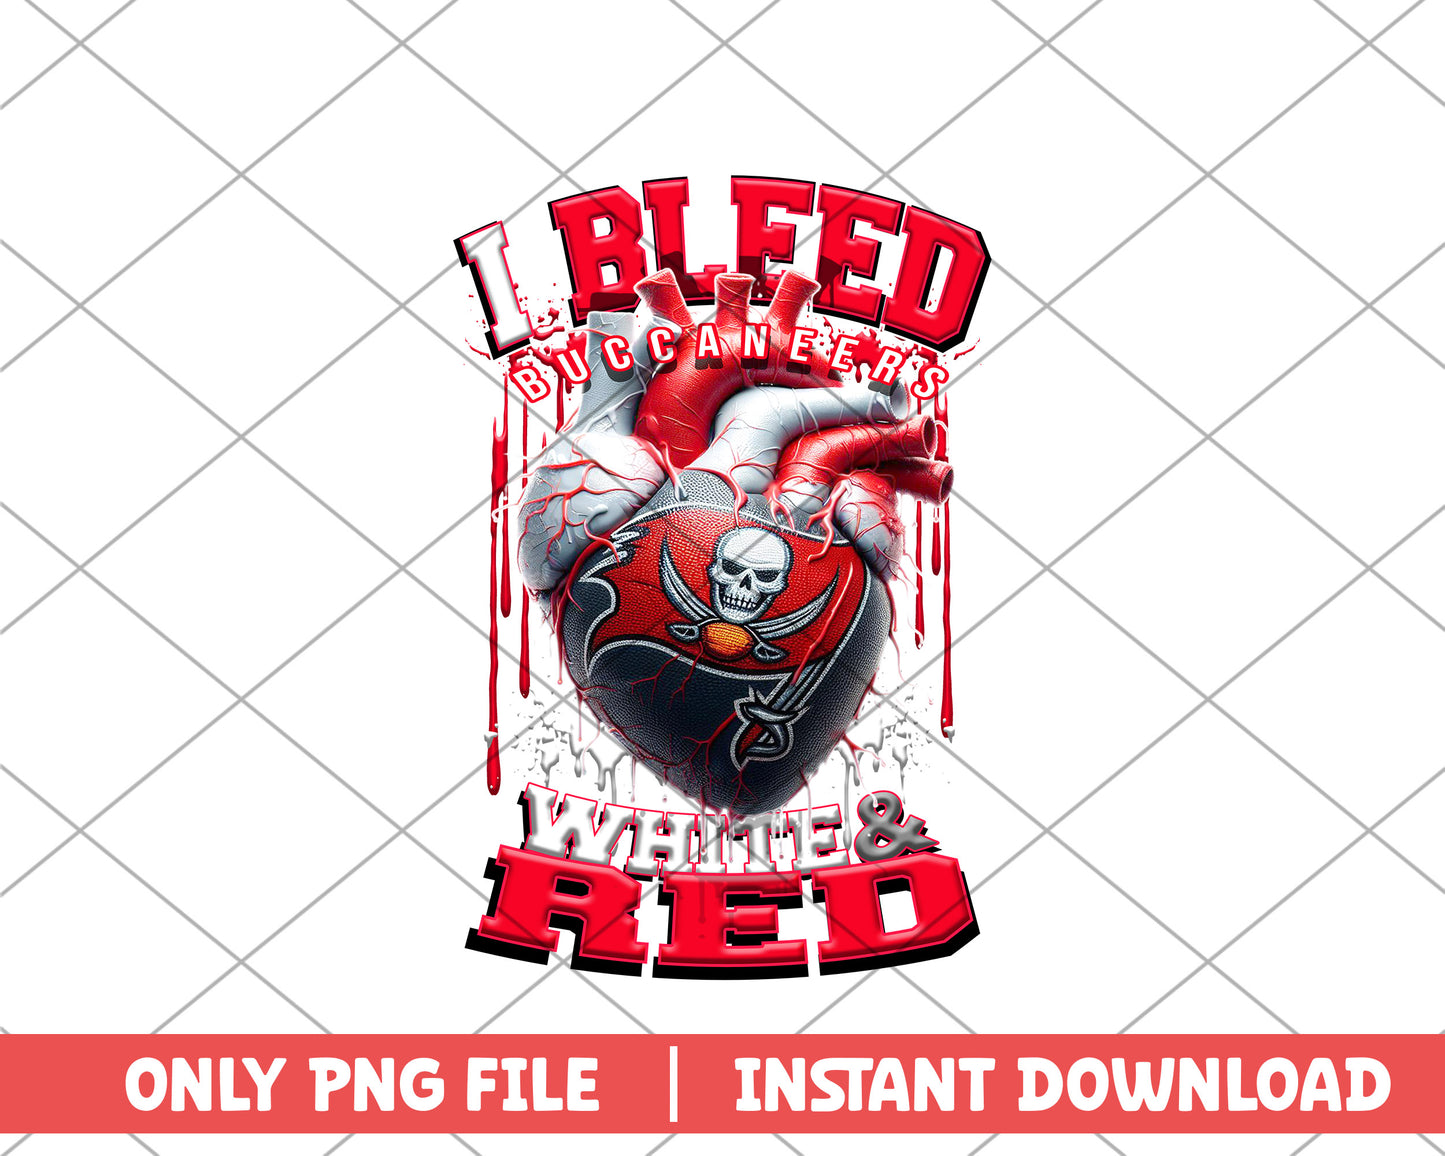 I bleed buccaneers white and red png, Tampa Bay Buccaneers png